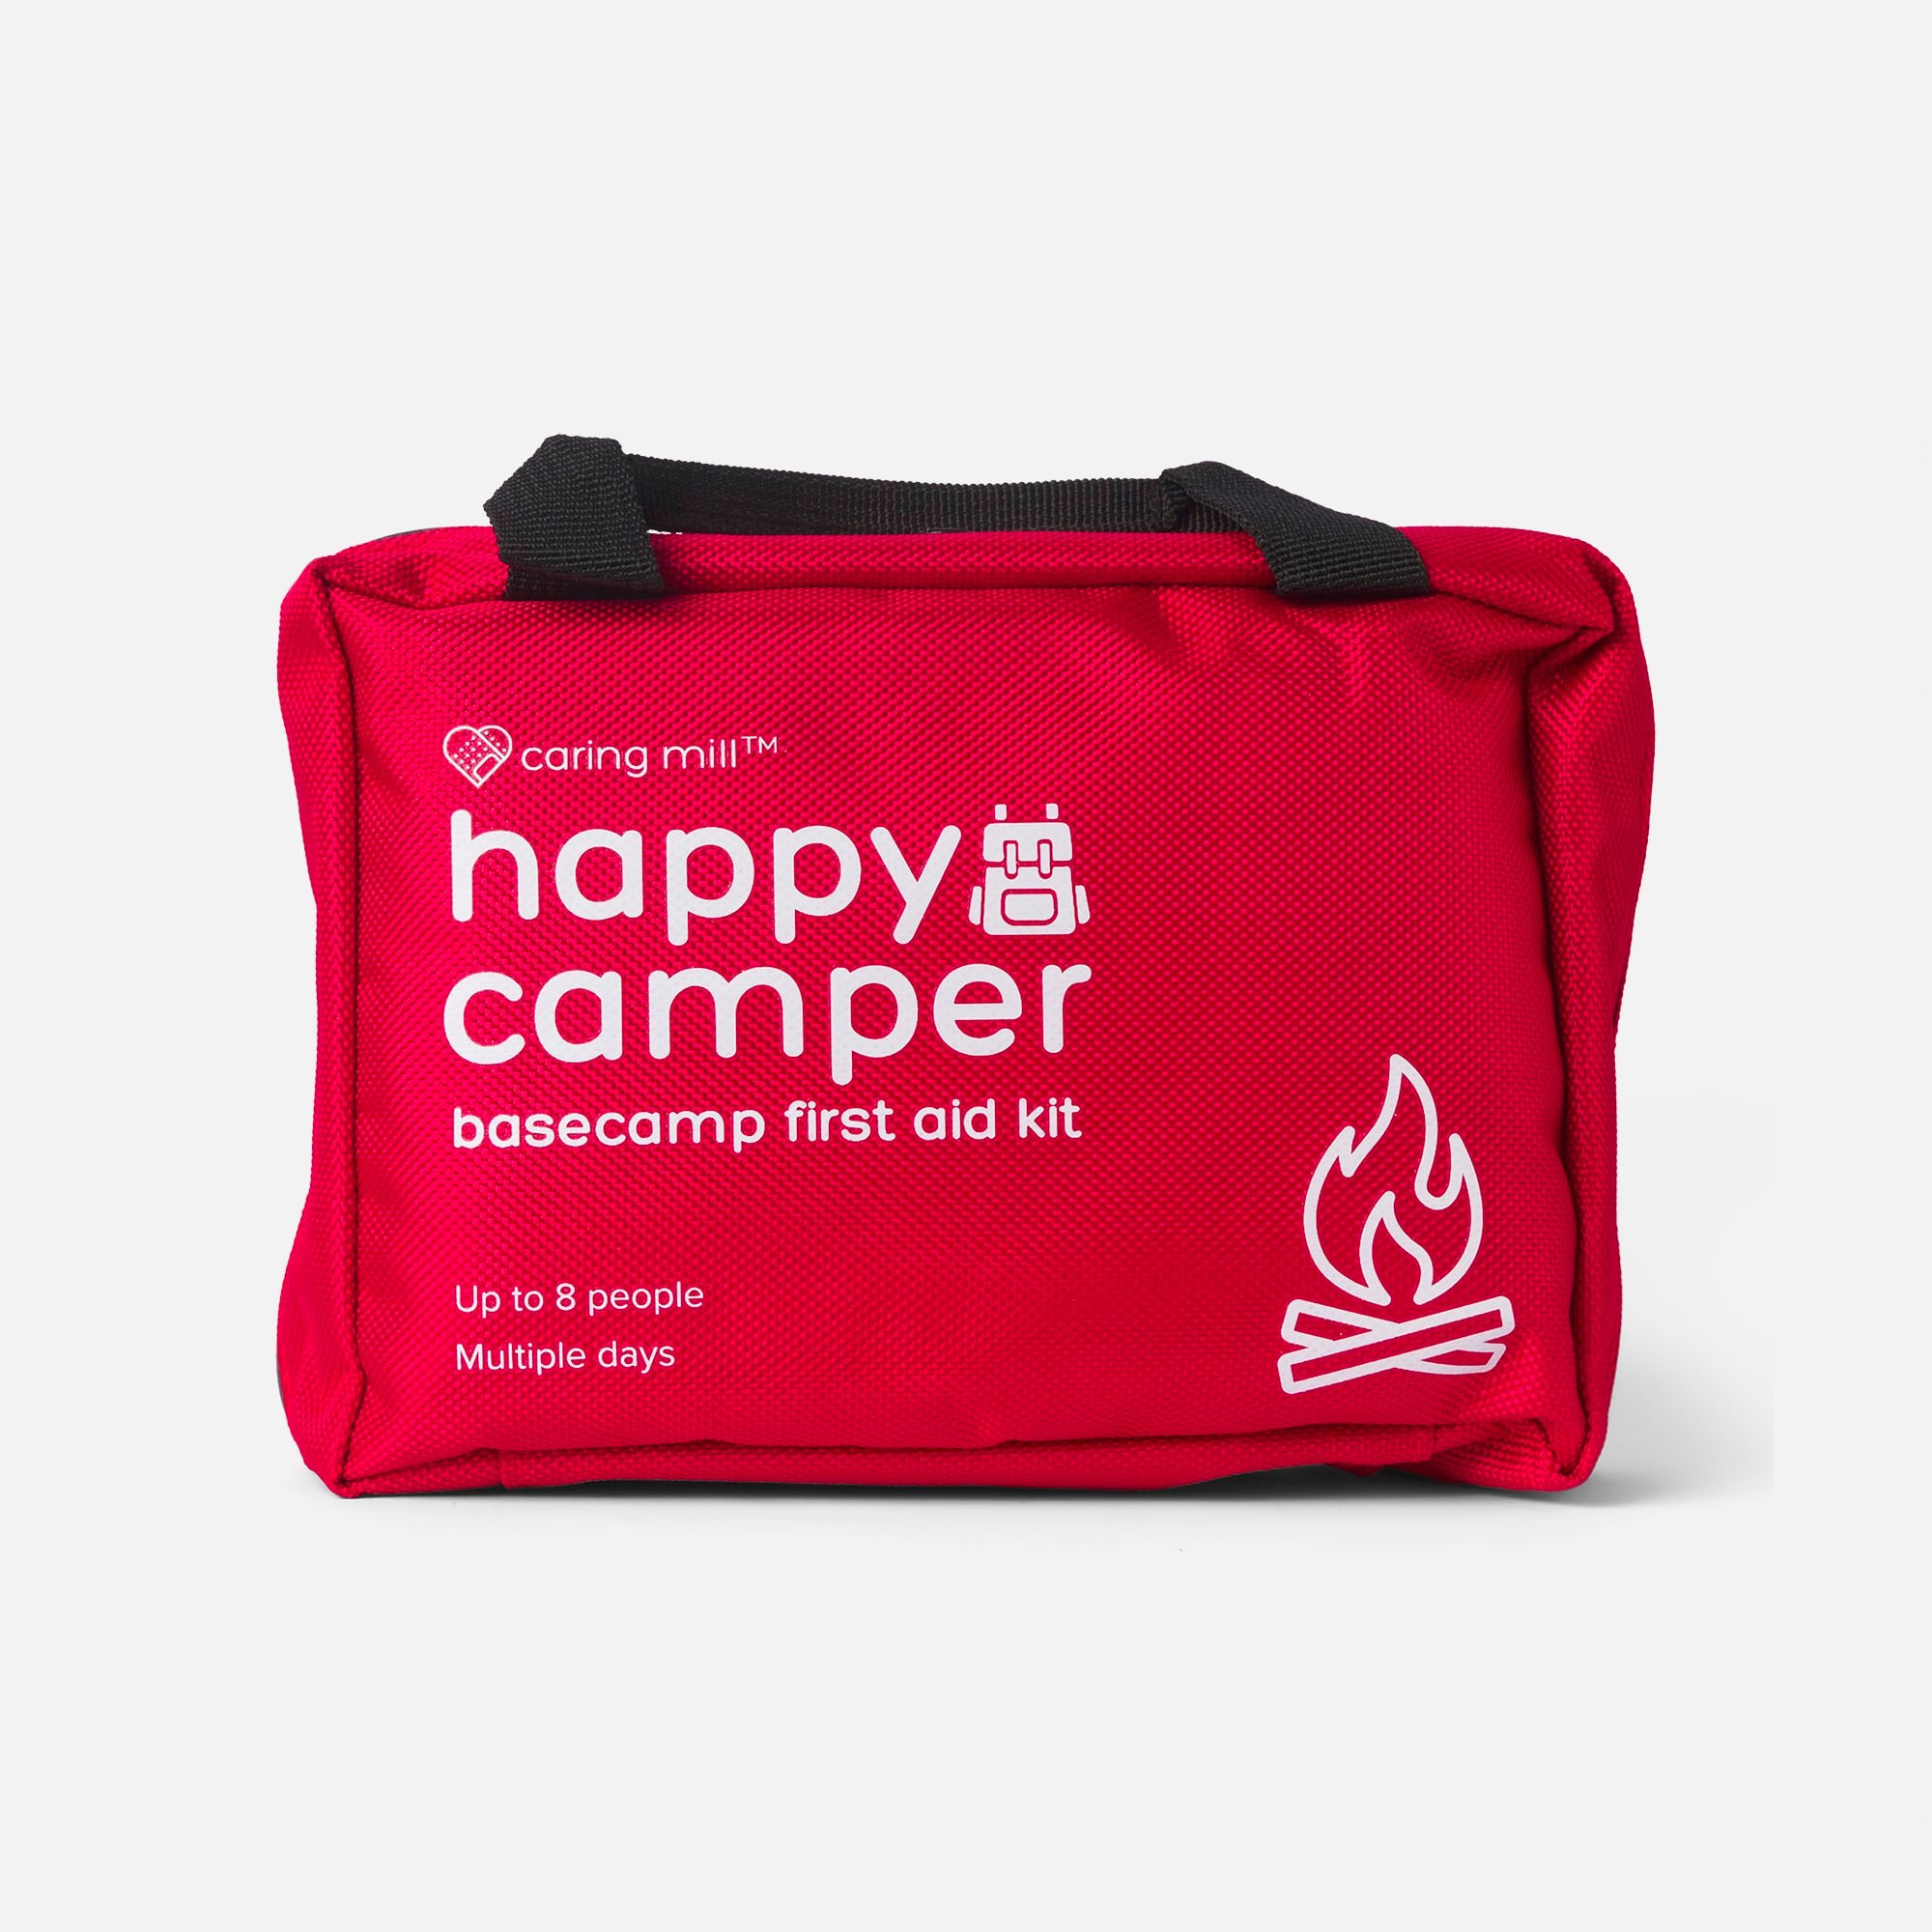 HSA-Eligible | Caring Mill Happy Camper Basecamp First Aid Kit